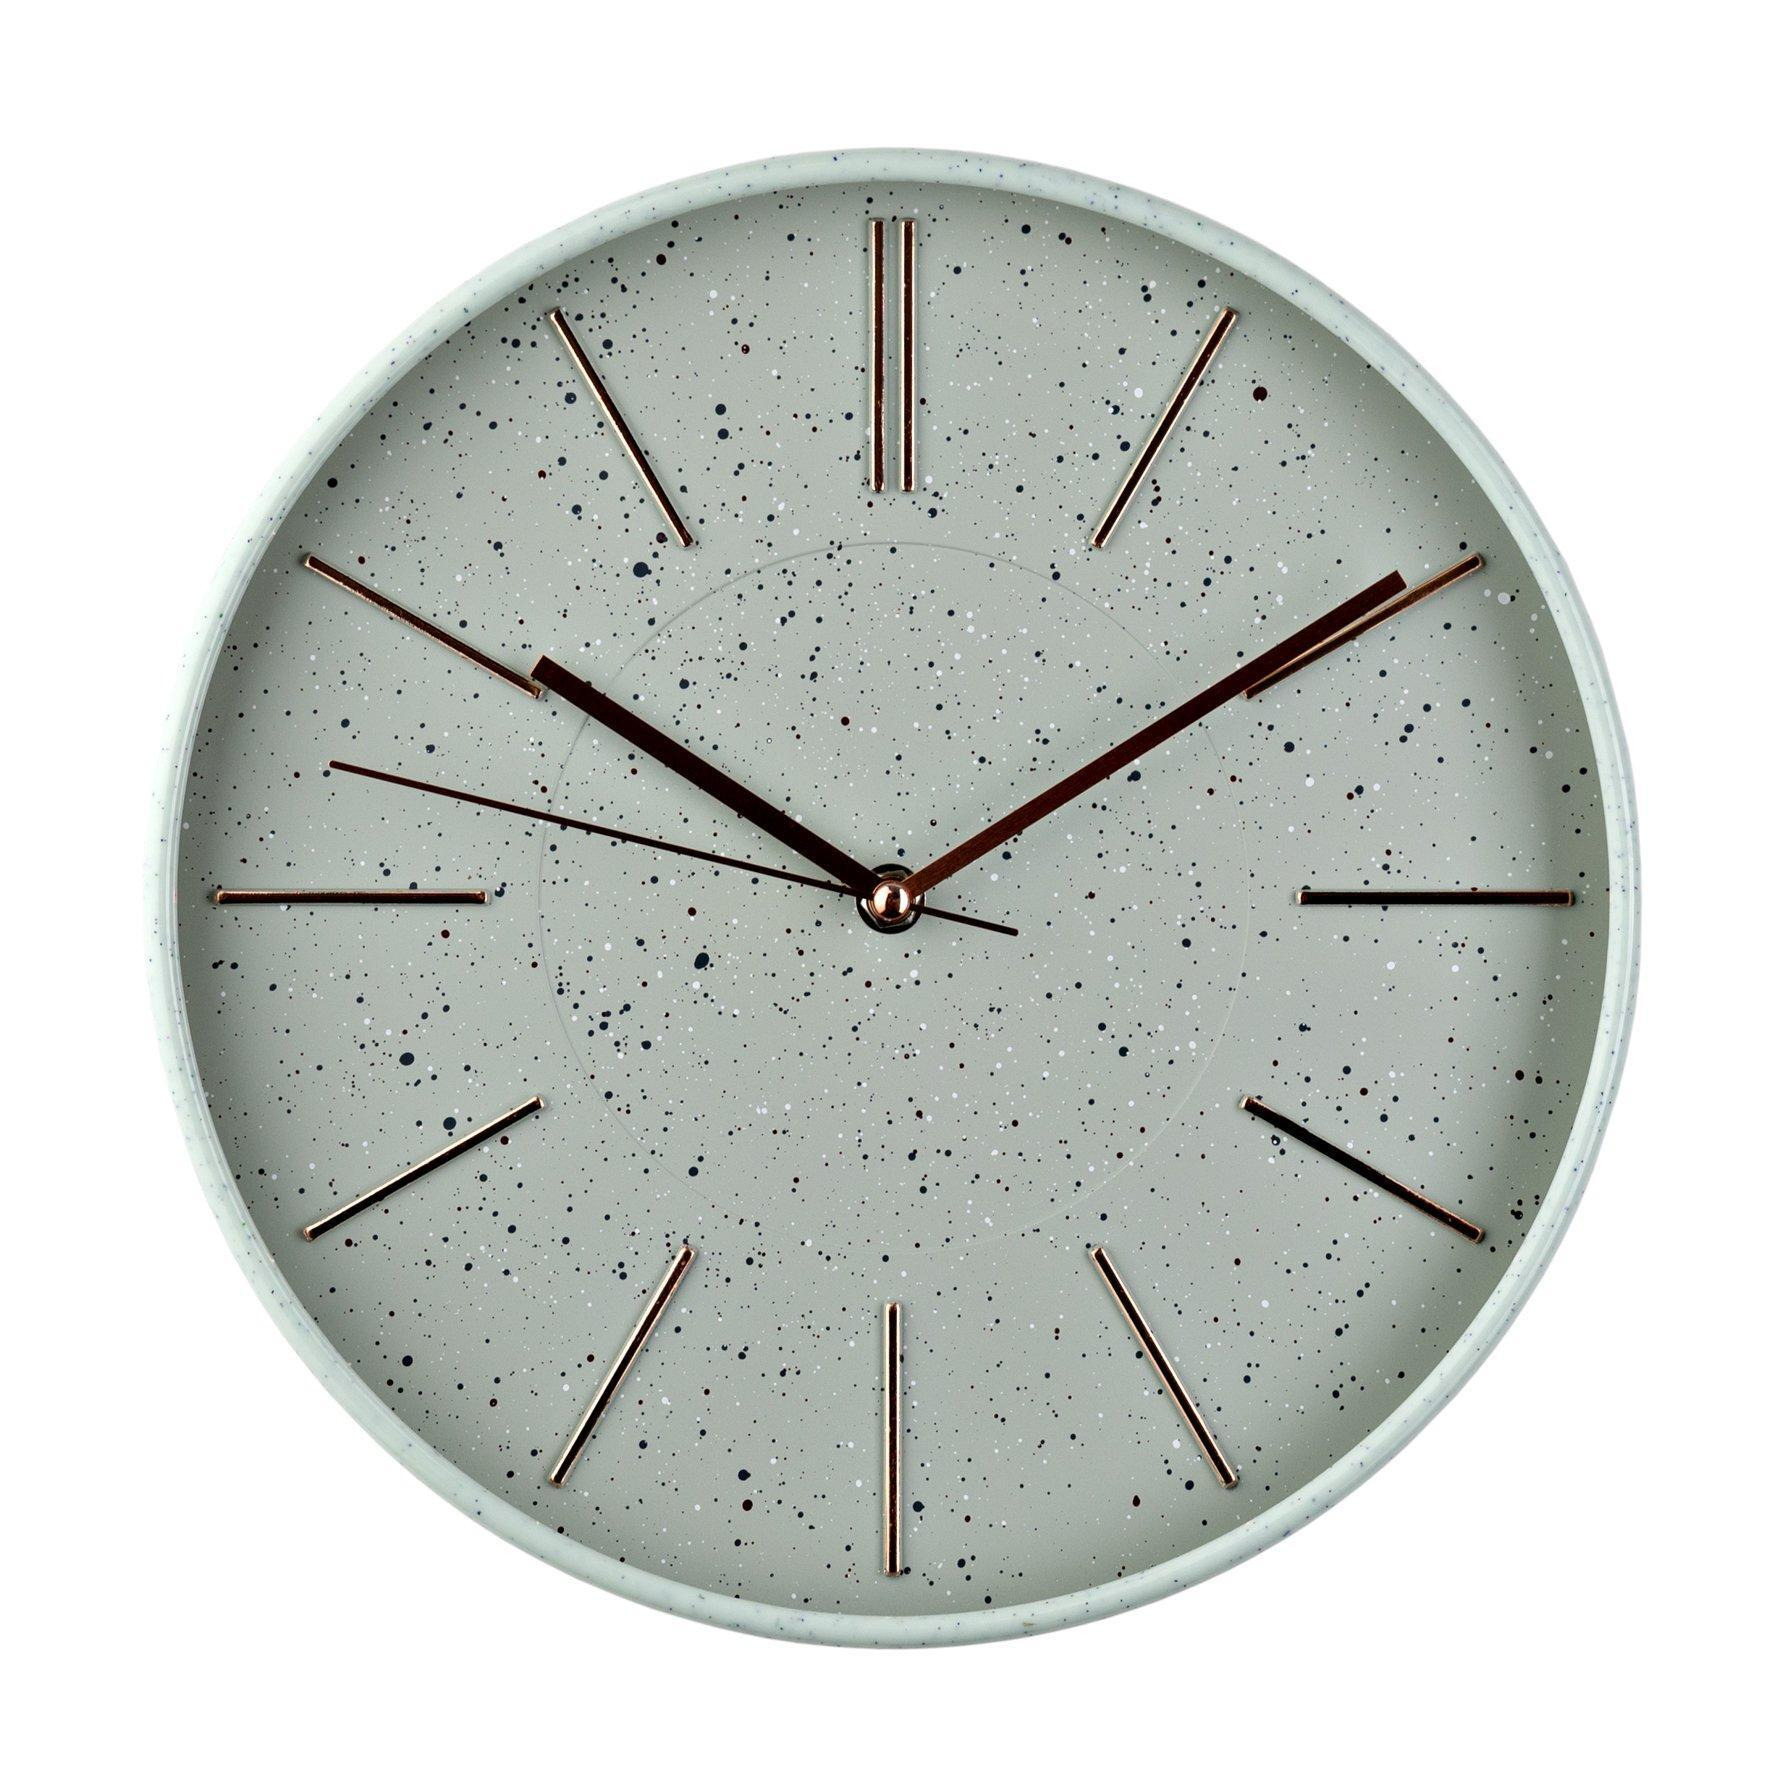 "Hometime Round Wall Clock Speckled Face 12""" - image 1